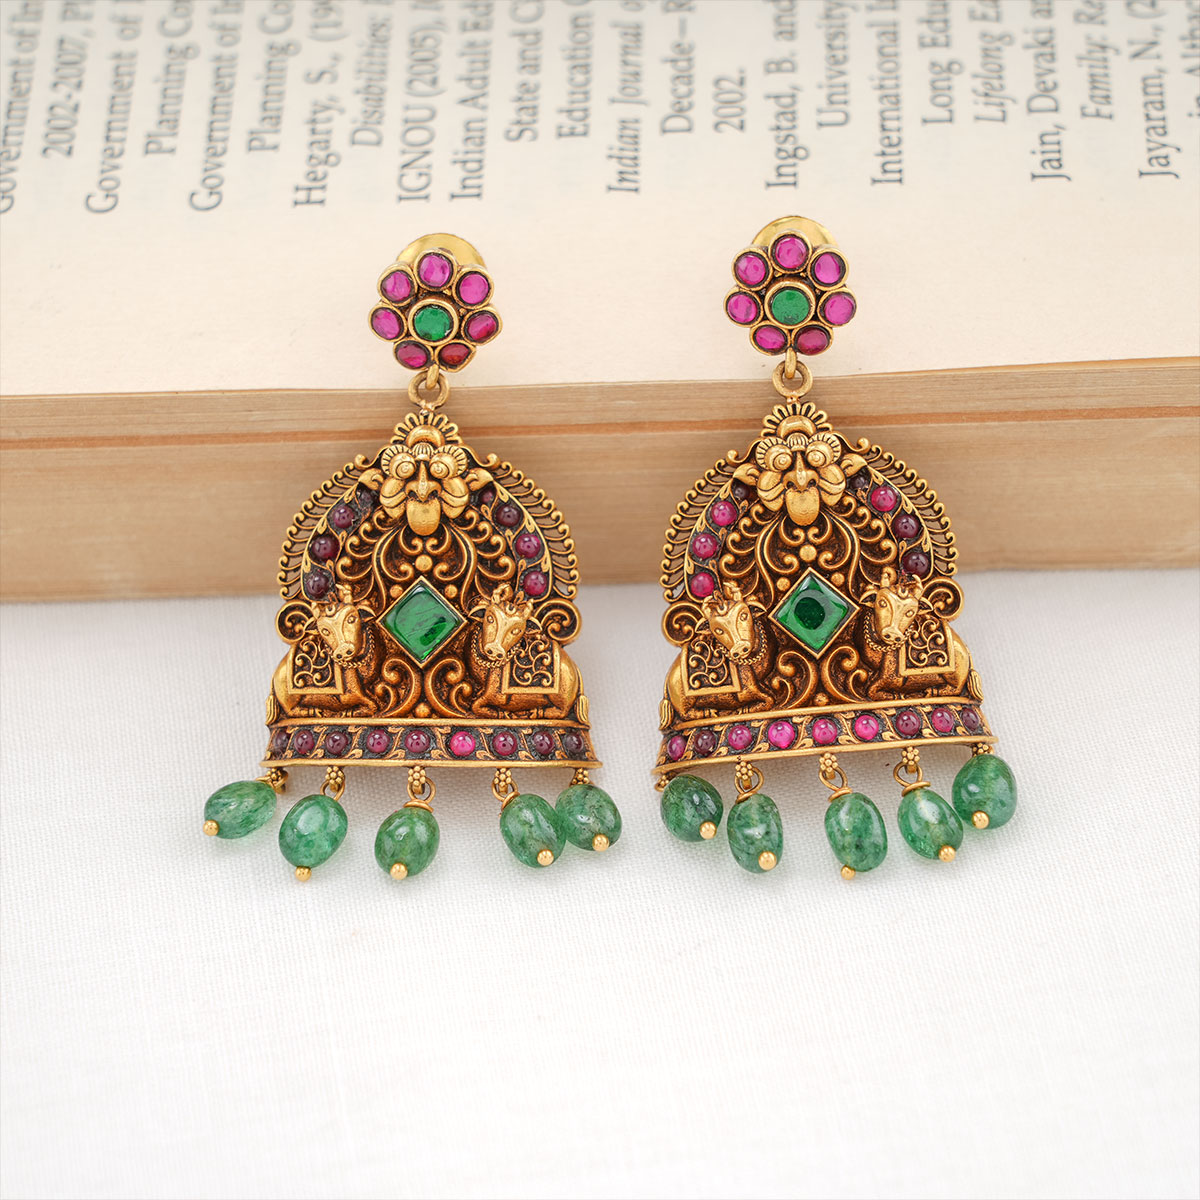 Admirable Antique Earrings